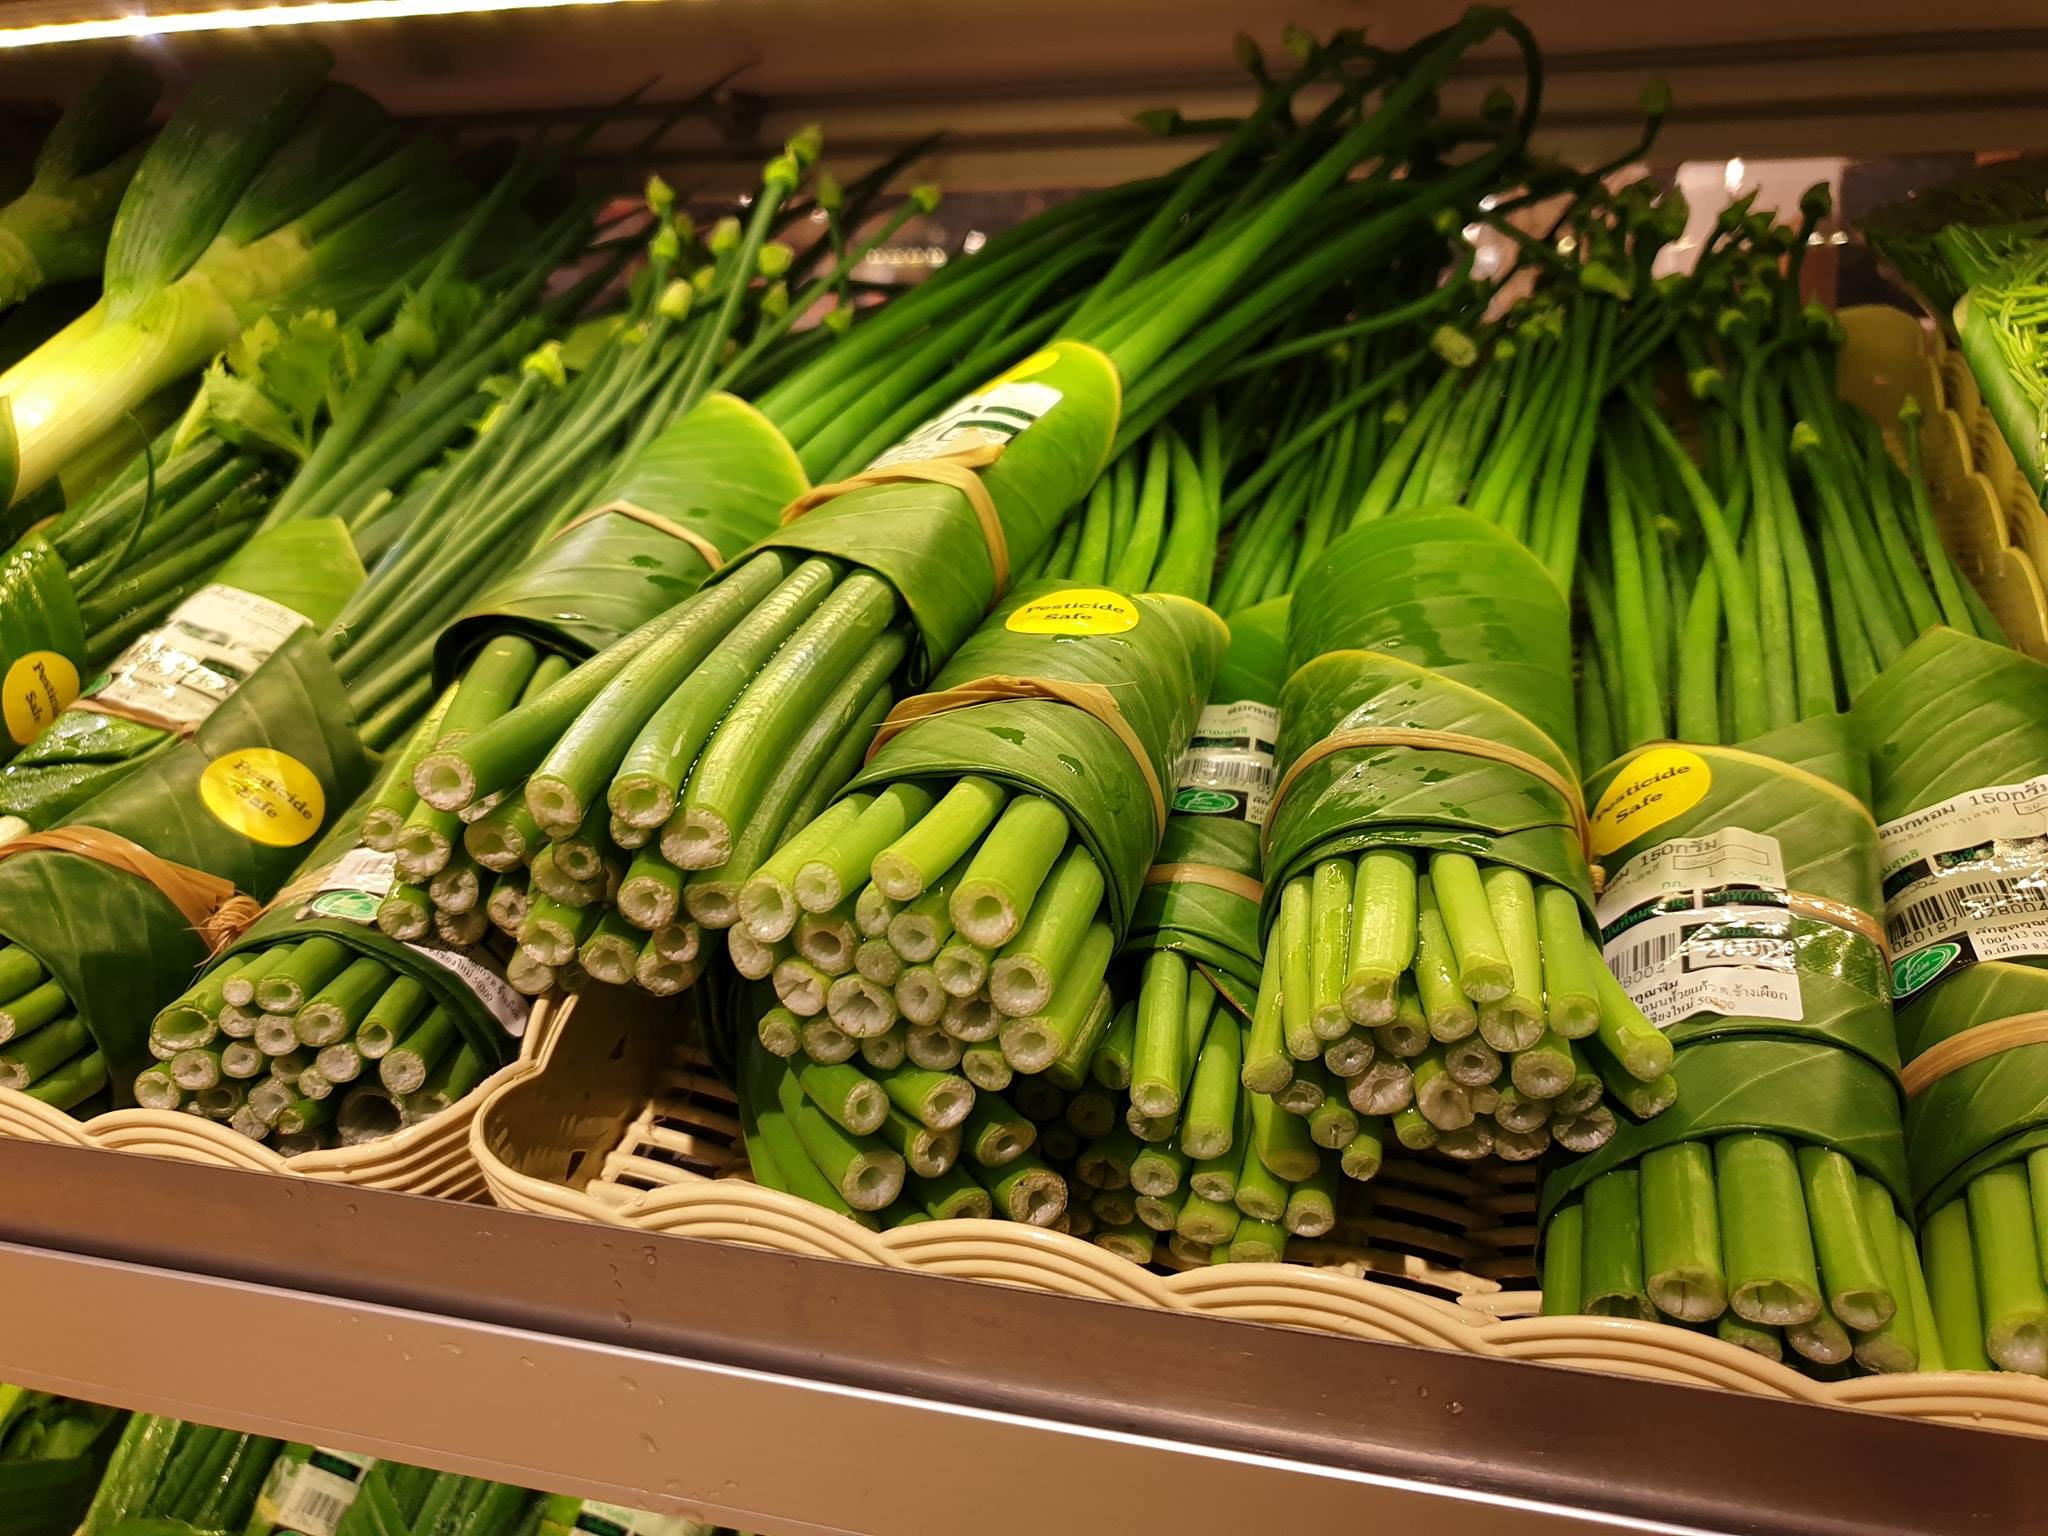 replacing plastic bags with banana leaves